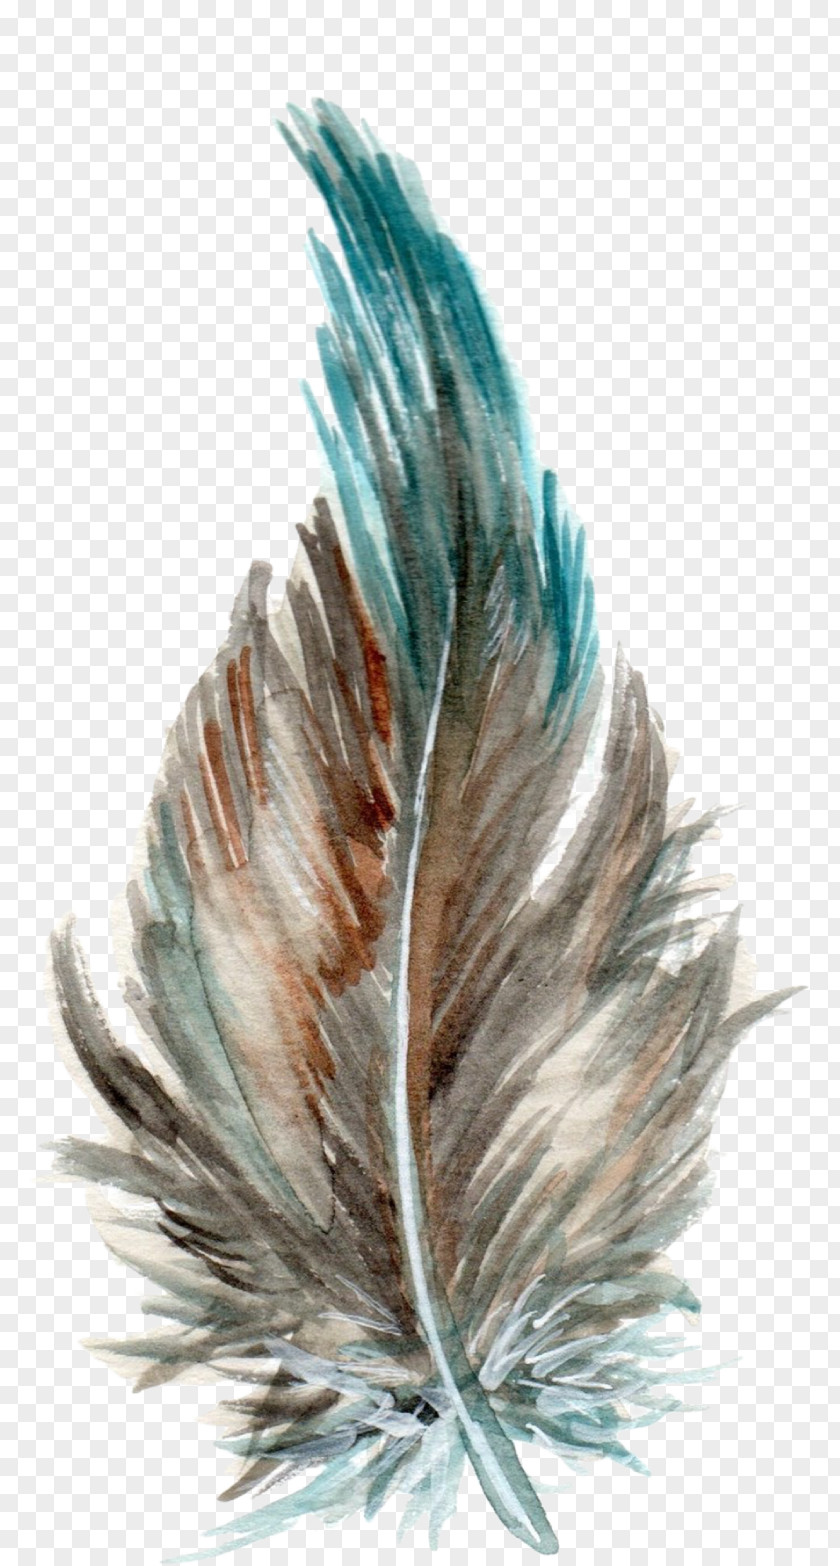 Feathers Teal Turquoise Feather Tail PNG